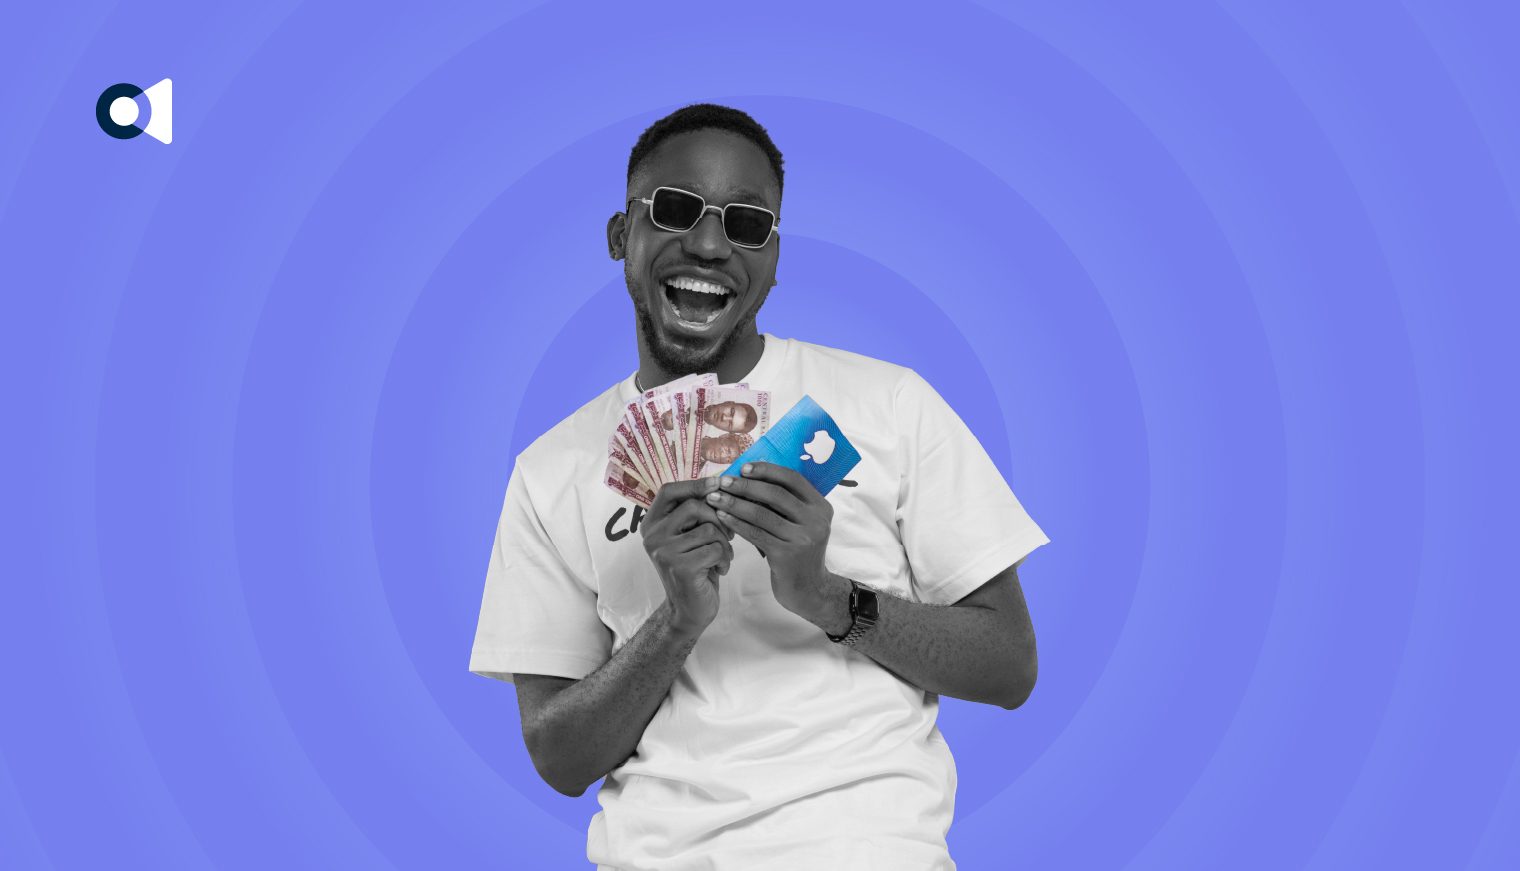 An image of someone with an Apple gift card and money.